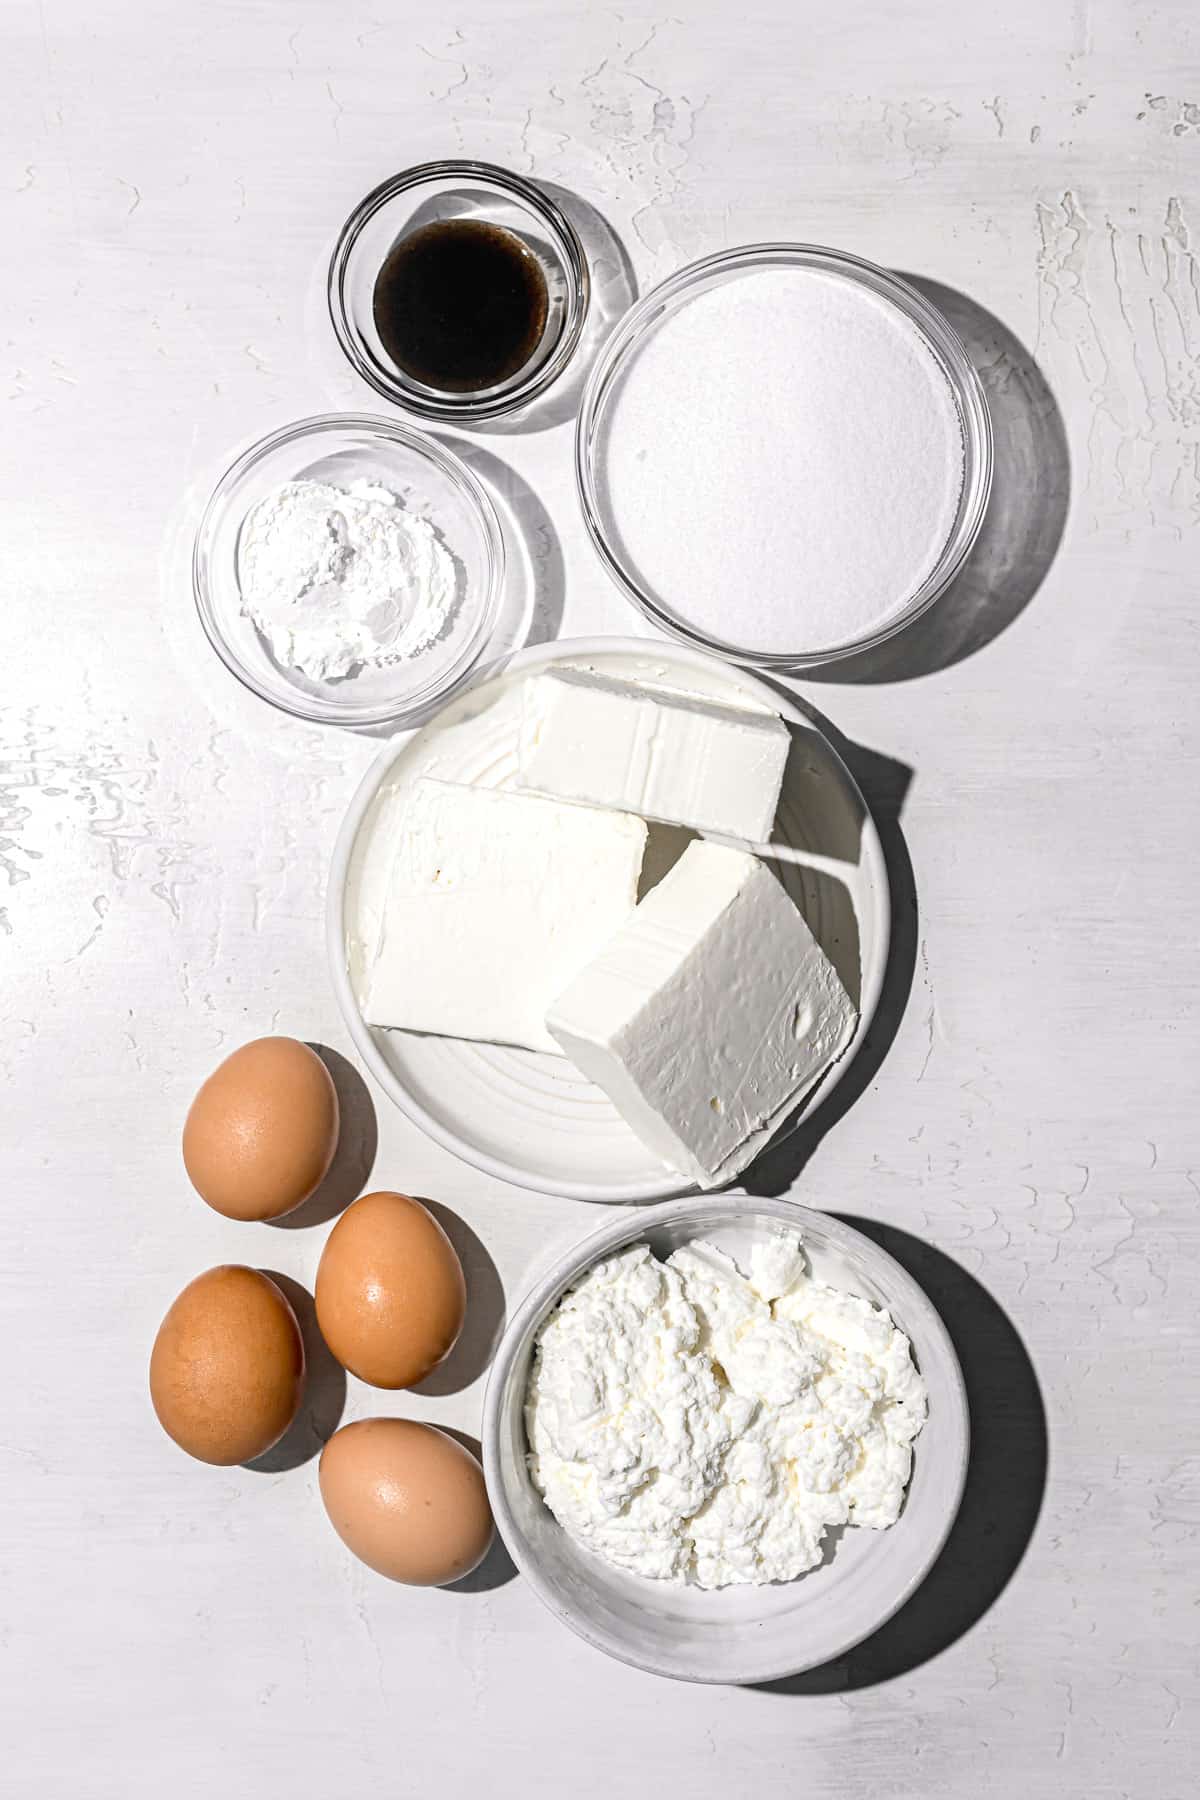 ingredients for sicilian cheesecake filling